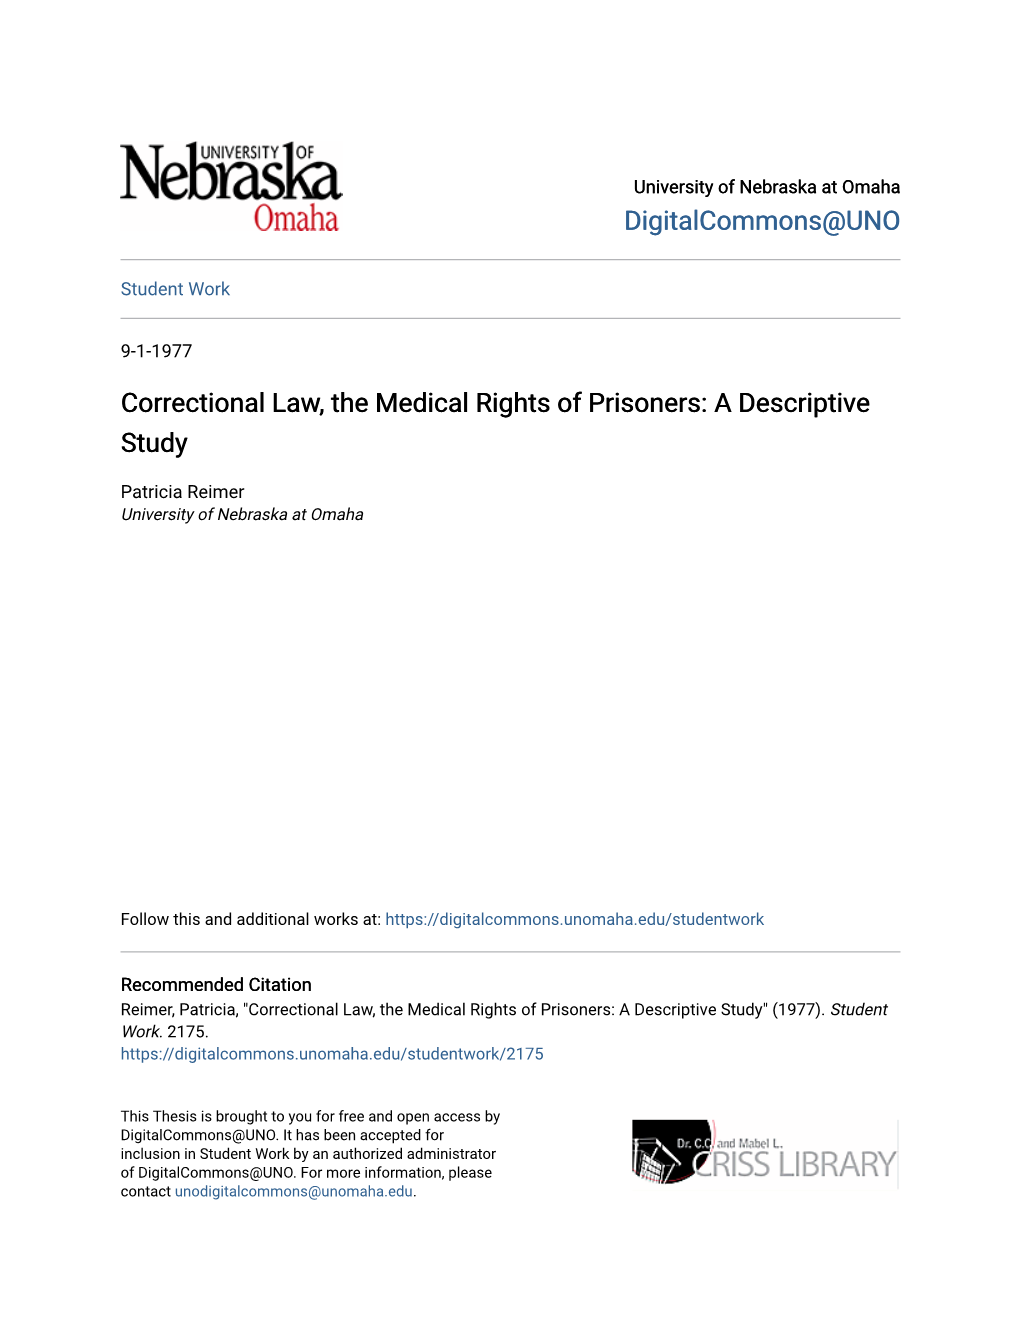 Correctional Law, the Medical Rights of Prisoners: a Descriptive Study